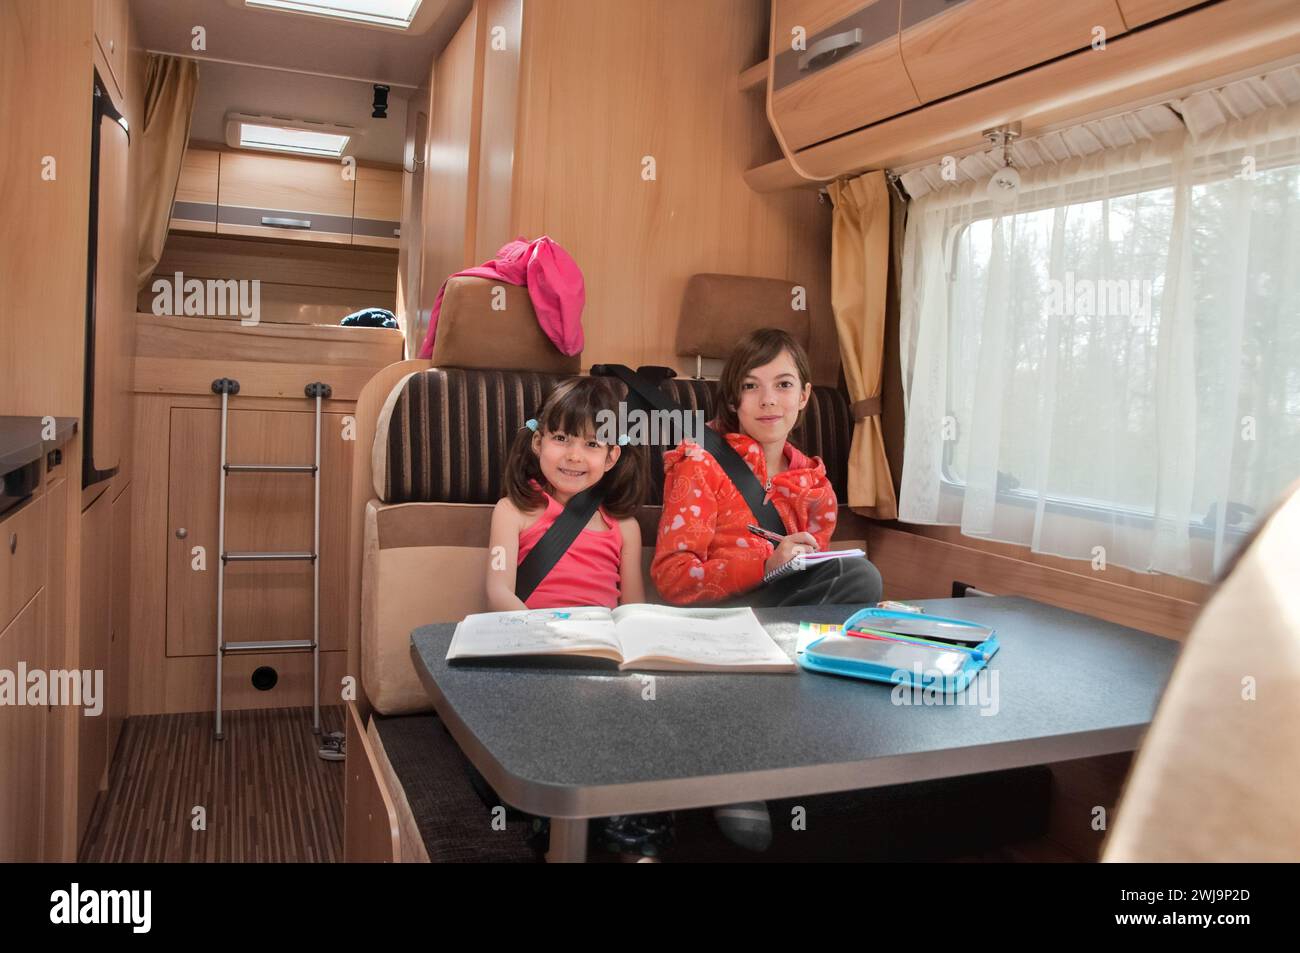 Family vacation, RV holiday trip, camping, happy smiling kids travel on camper, children in motorhome interior Stock Photo